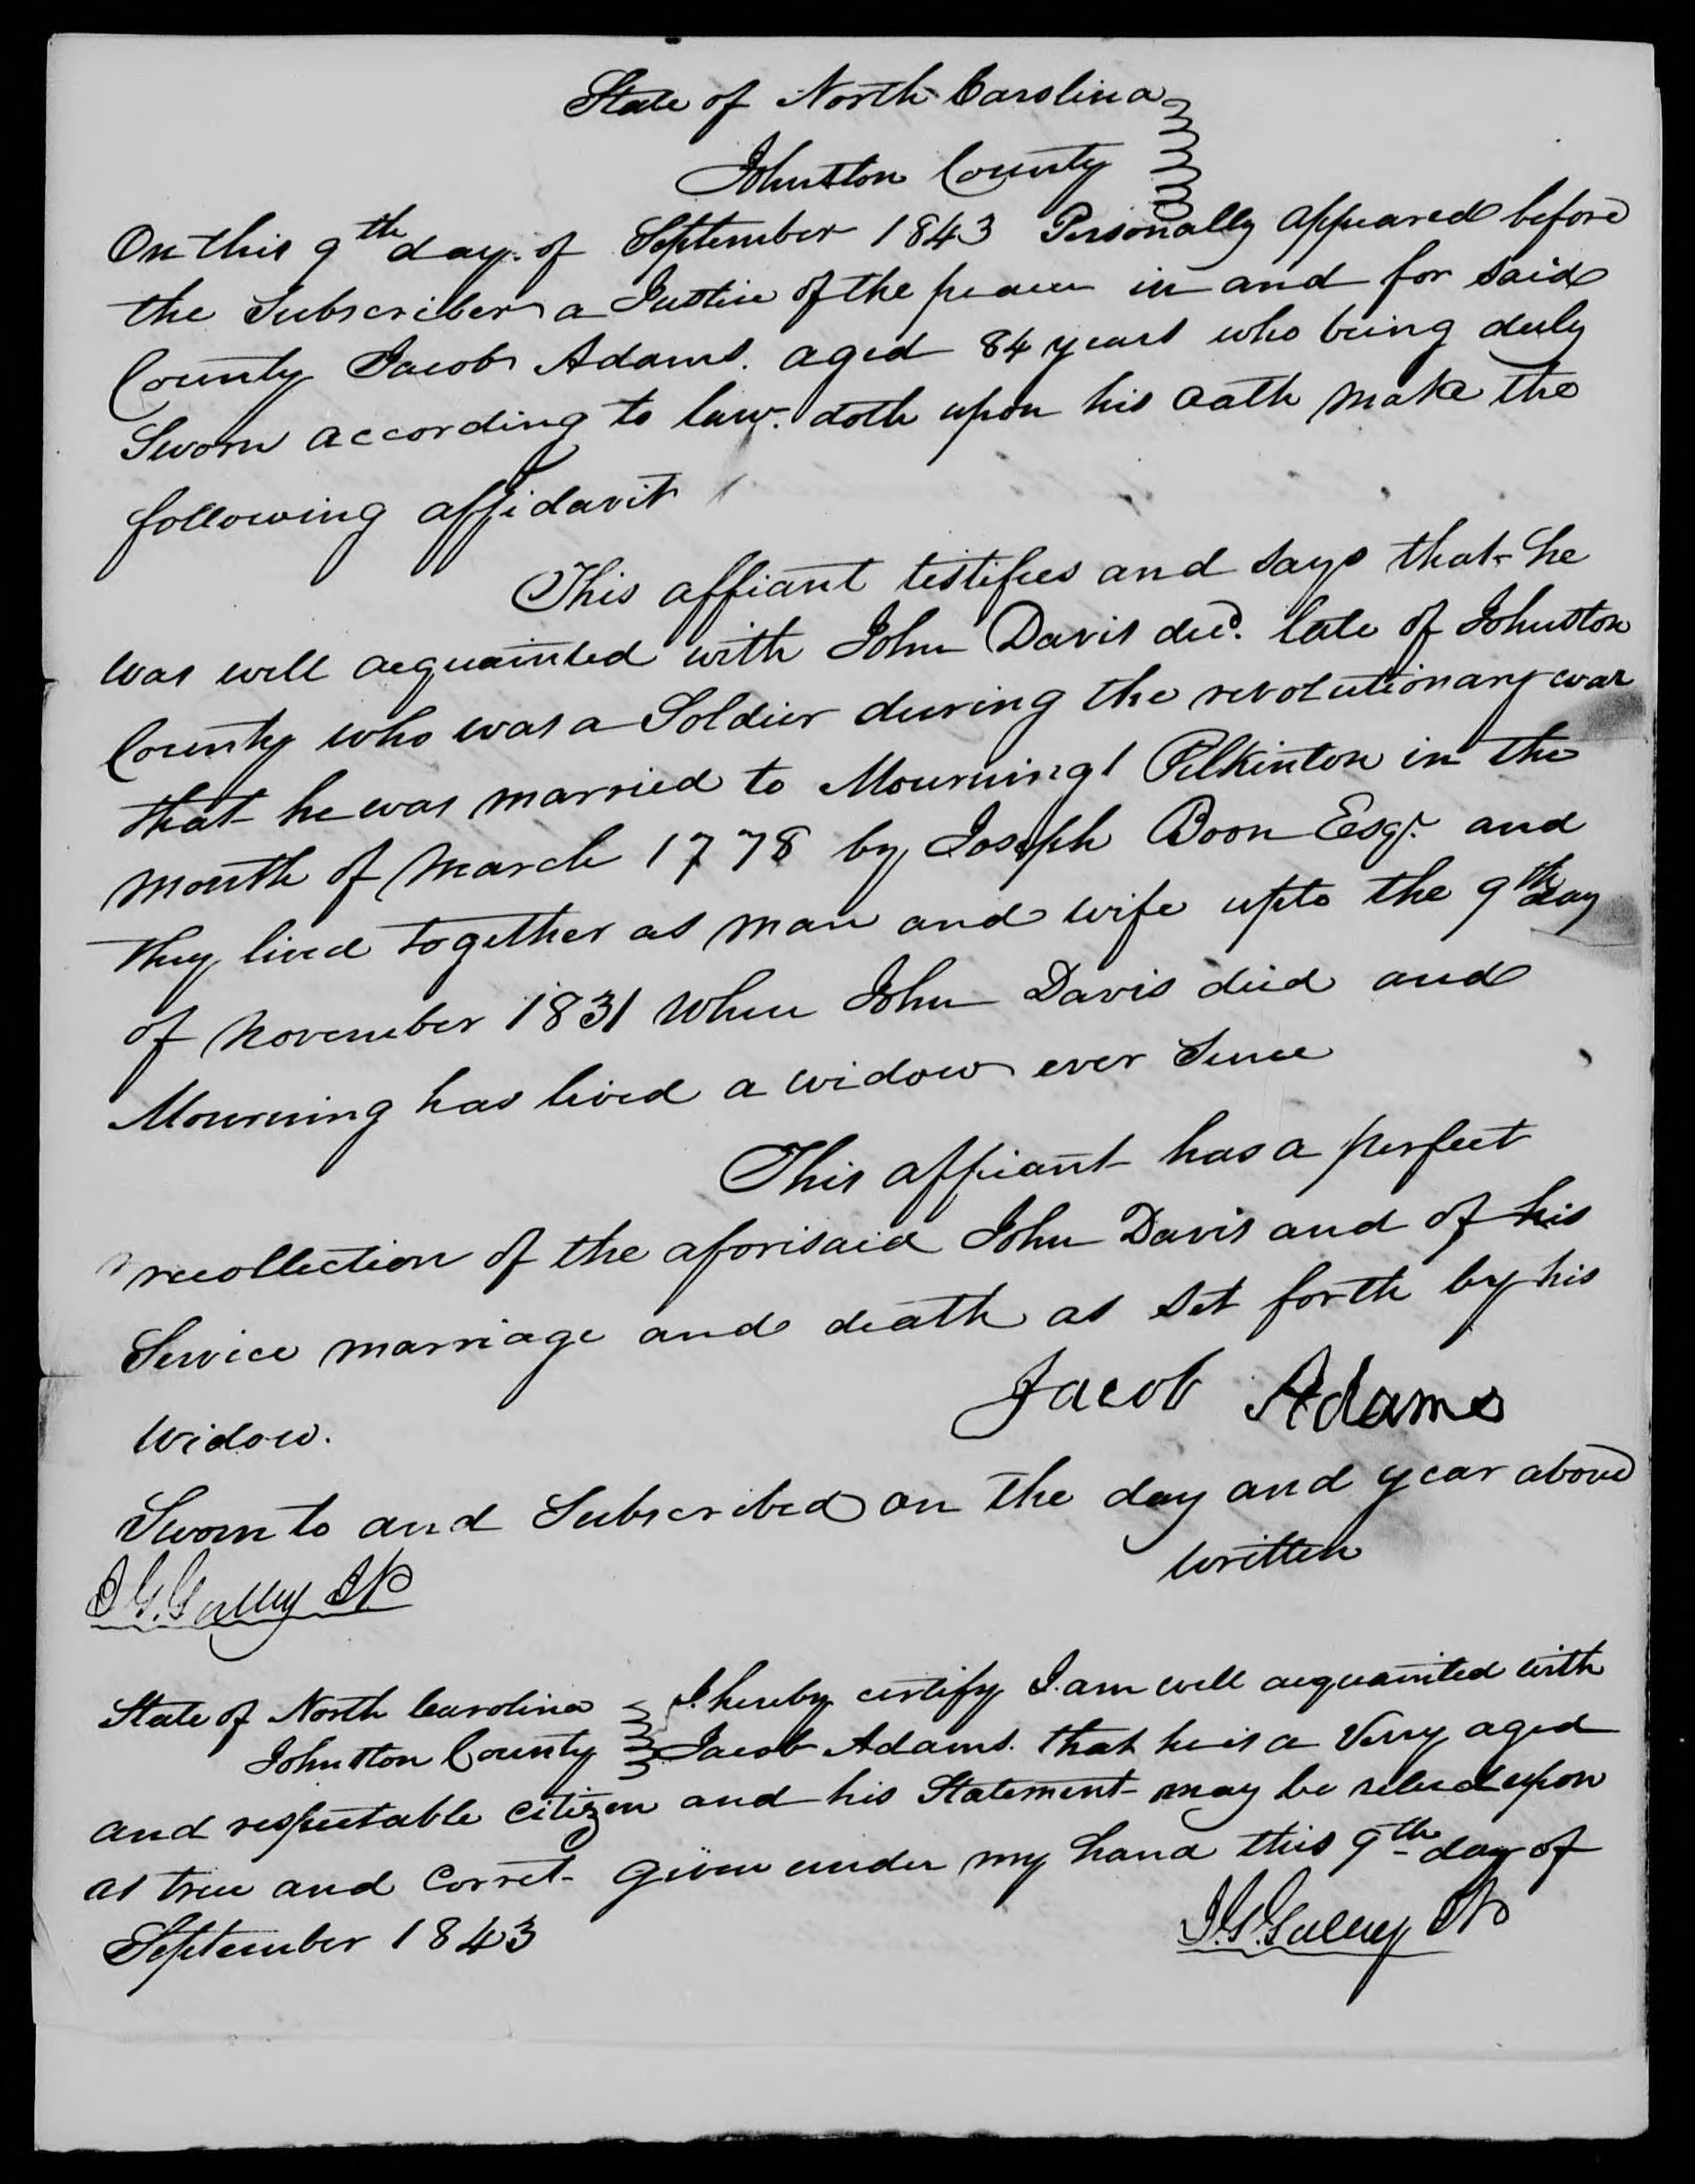 Affidavit of Jacob Adams in support of a Pension Claim for Mourning Davis, 9 September 1843